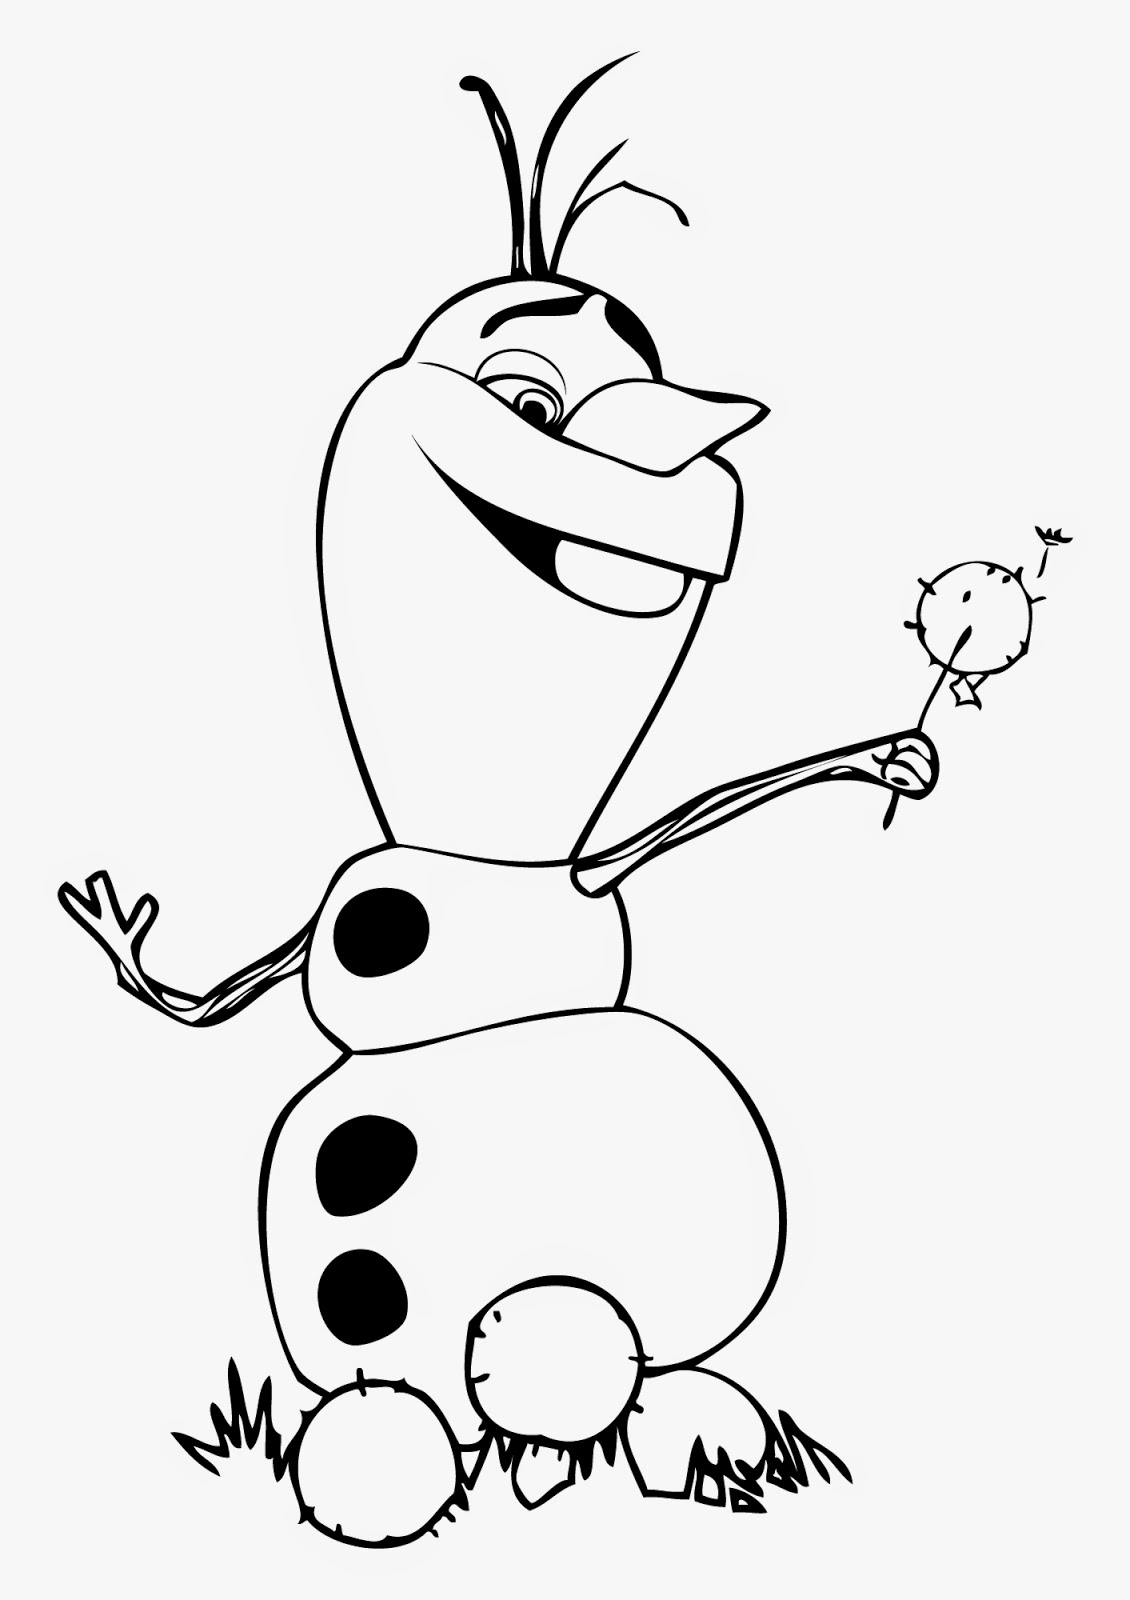 olaf from frozen coloring pages - photo #22